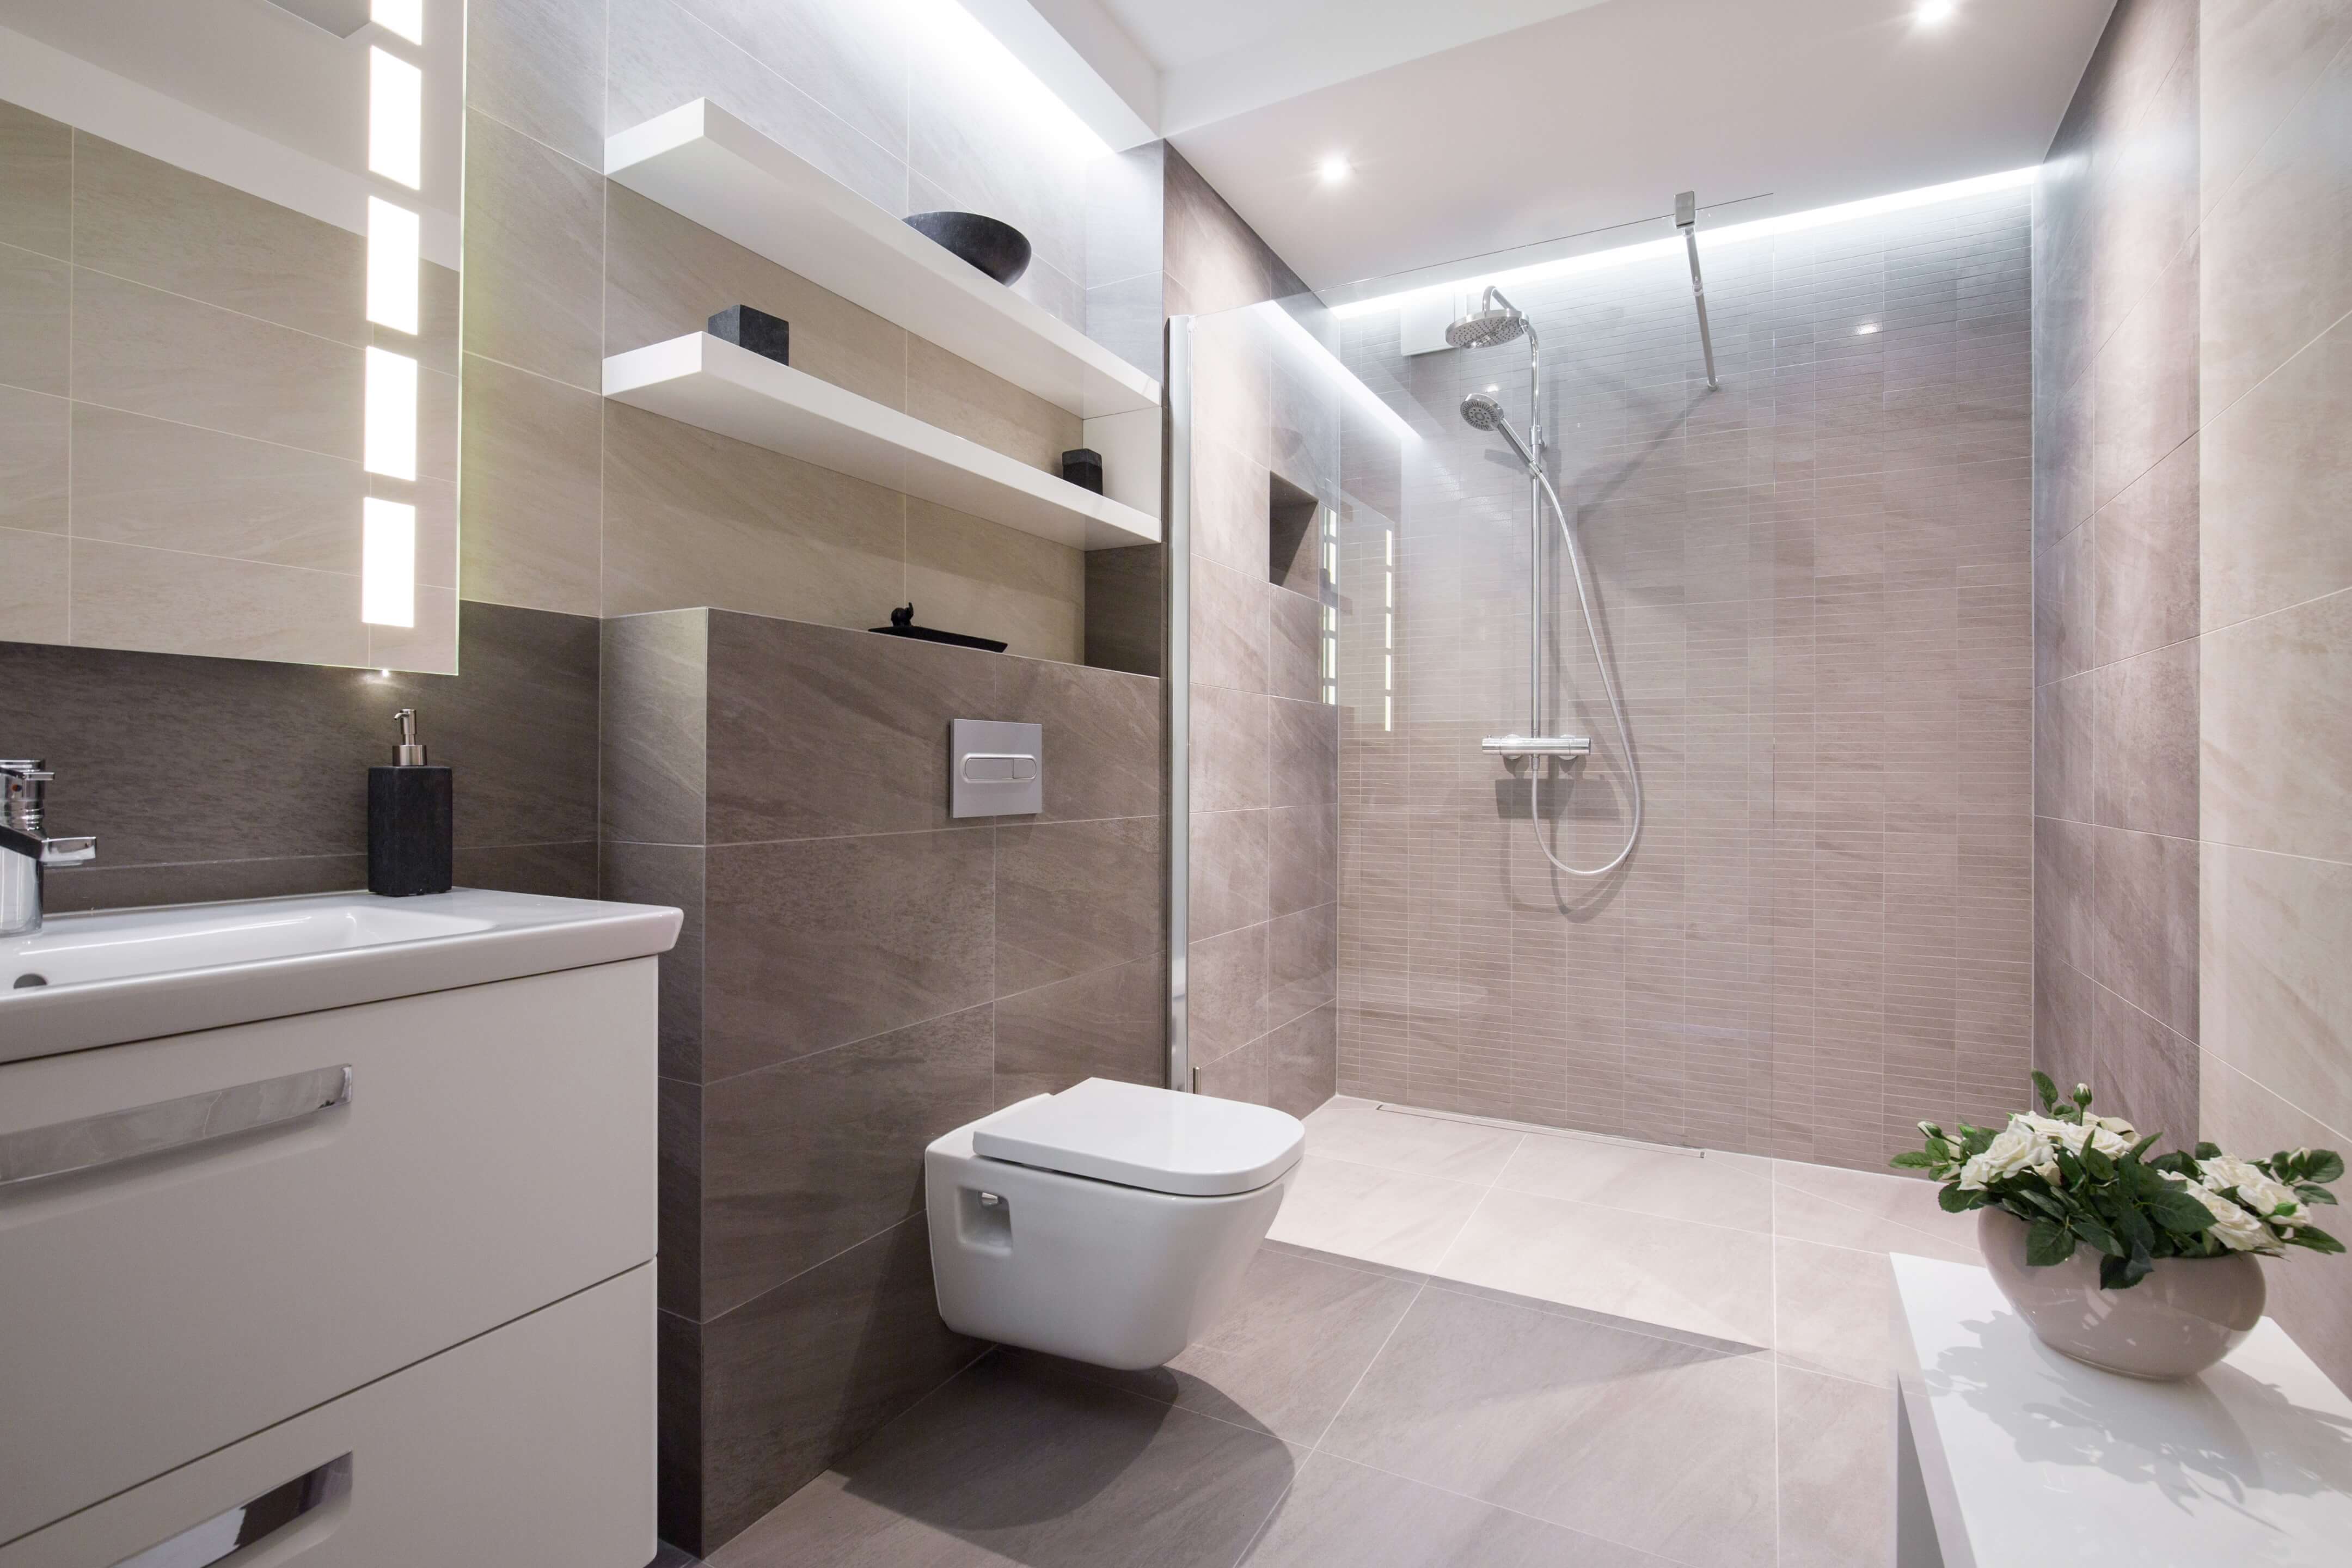 local bathroom fitters plumstead common